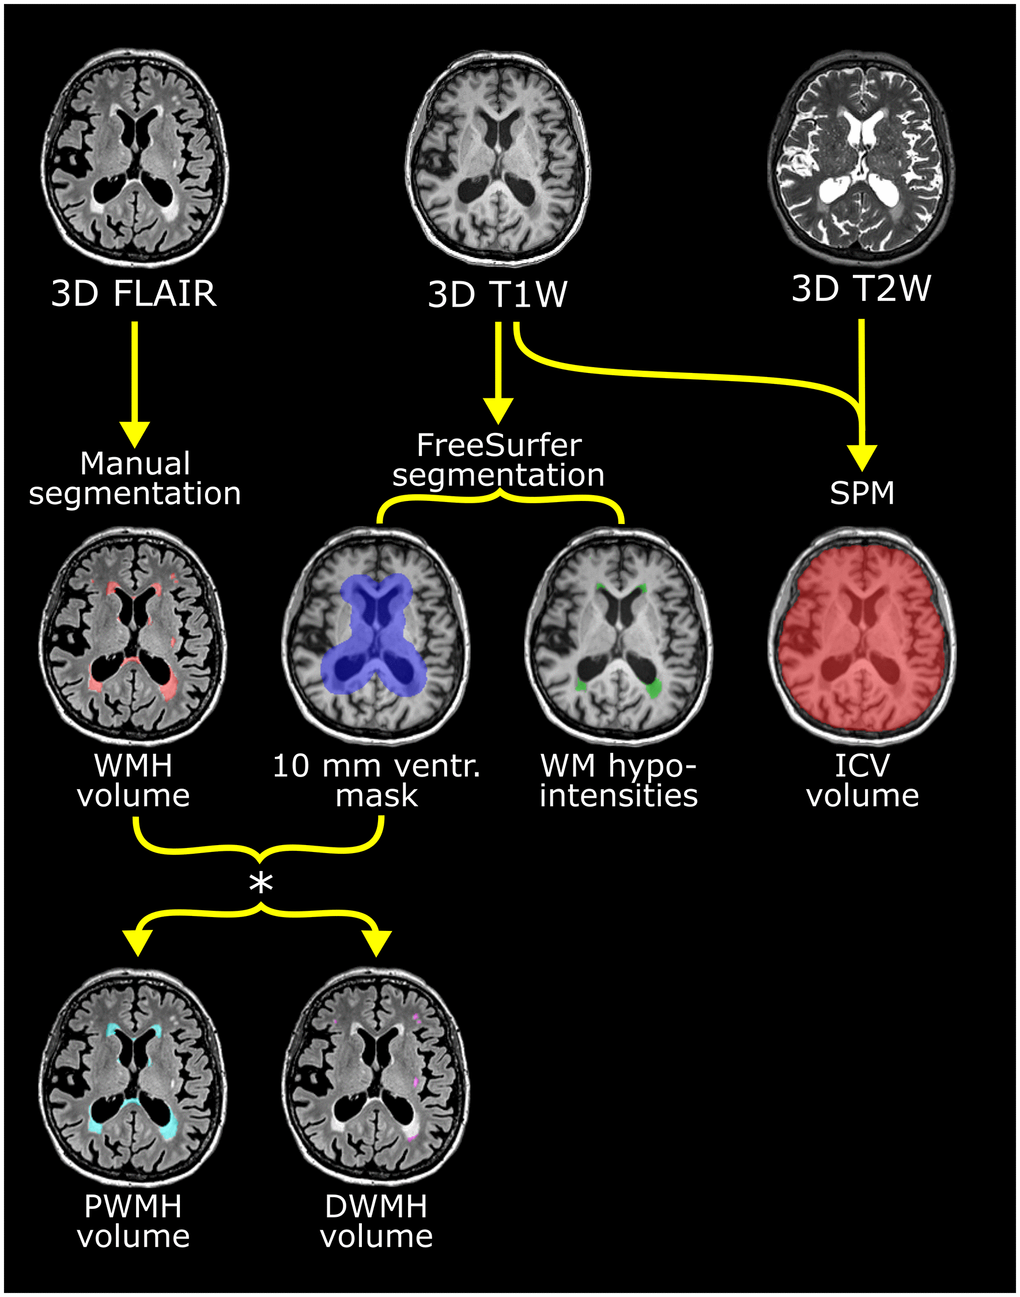 Flow chart of the multiparametric analysis of the brain MRI scans exemplified with scans from one participant. Upper row shows the 3D FLAIR, T1- and T2-weighted scans used. See Table 10 for scan details. Manual segmentation of white mater hyperintensities (WMH) was performed on the FLAIR images. From the T1-weighted scan, the ventricular (ventr.) mask derived with FreeSurfer (shown in violet in middle row) was used to stratify WMH into periventricular white mater hyperintensities (PWMH) (located 